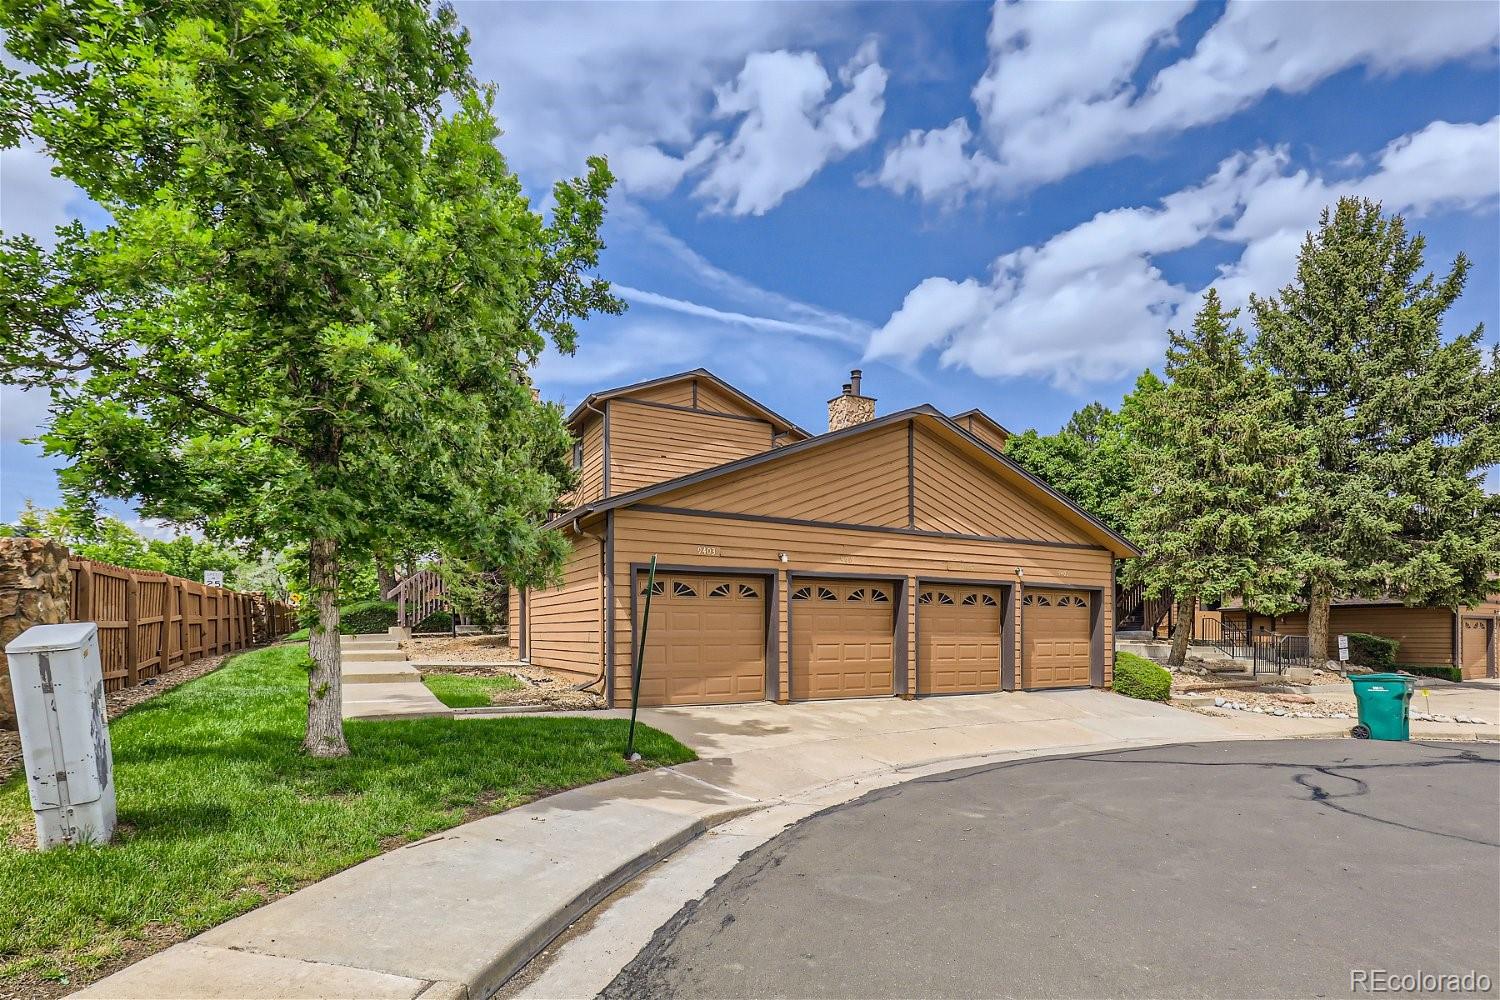 9403 W 89th Circle, Westminster, CO 80021 - MLS#: 8982685